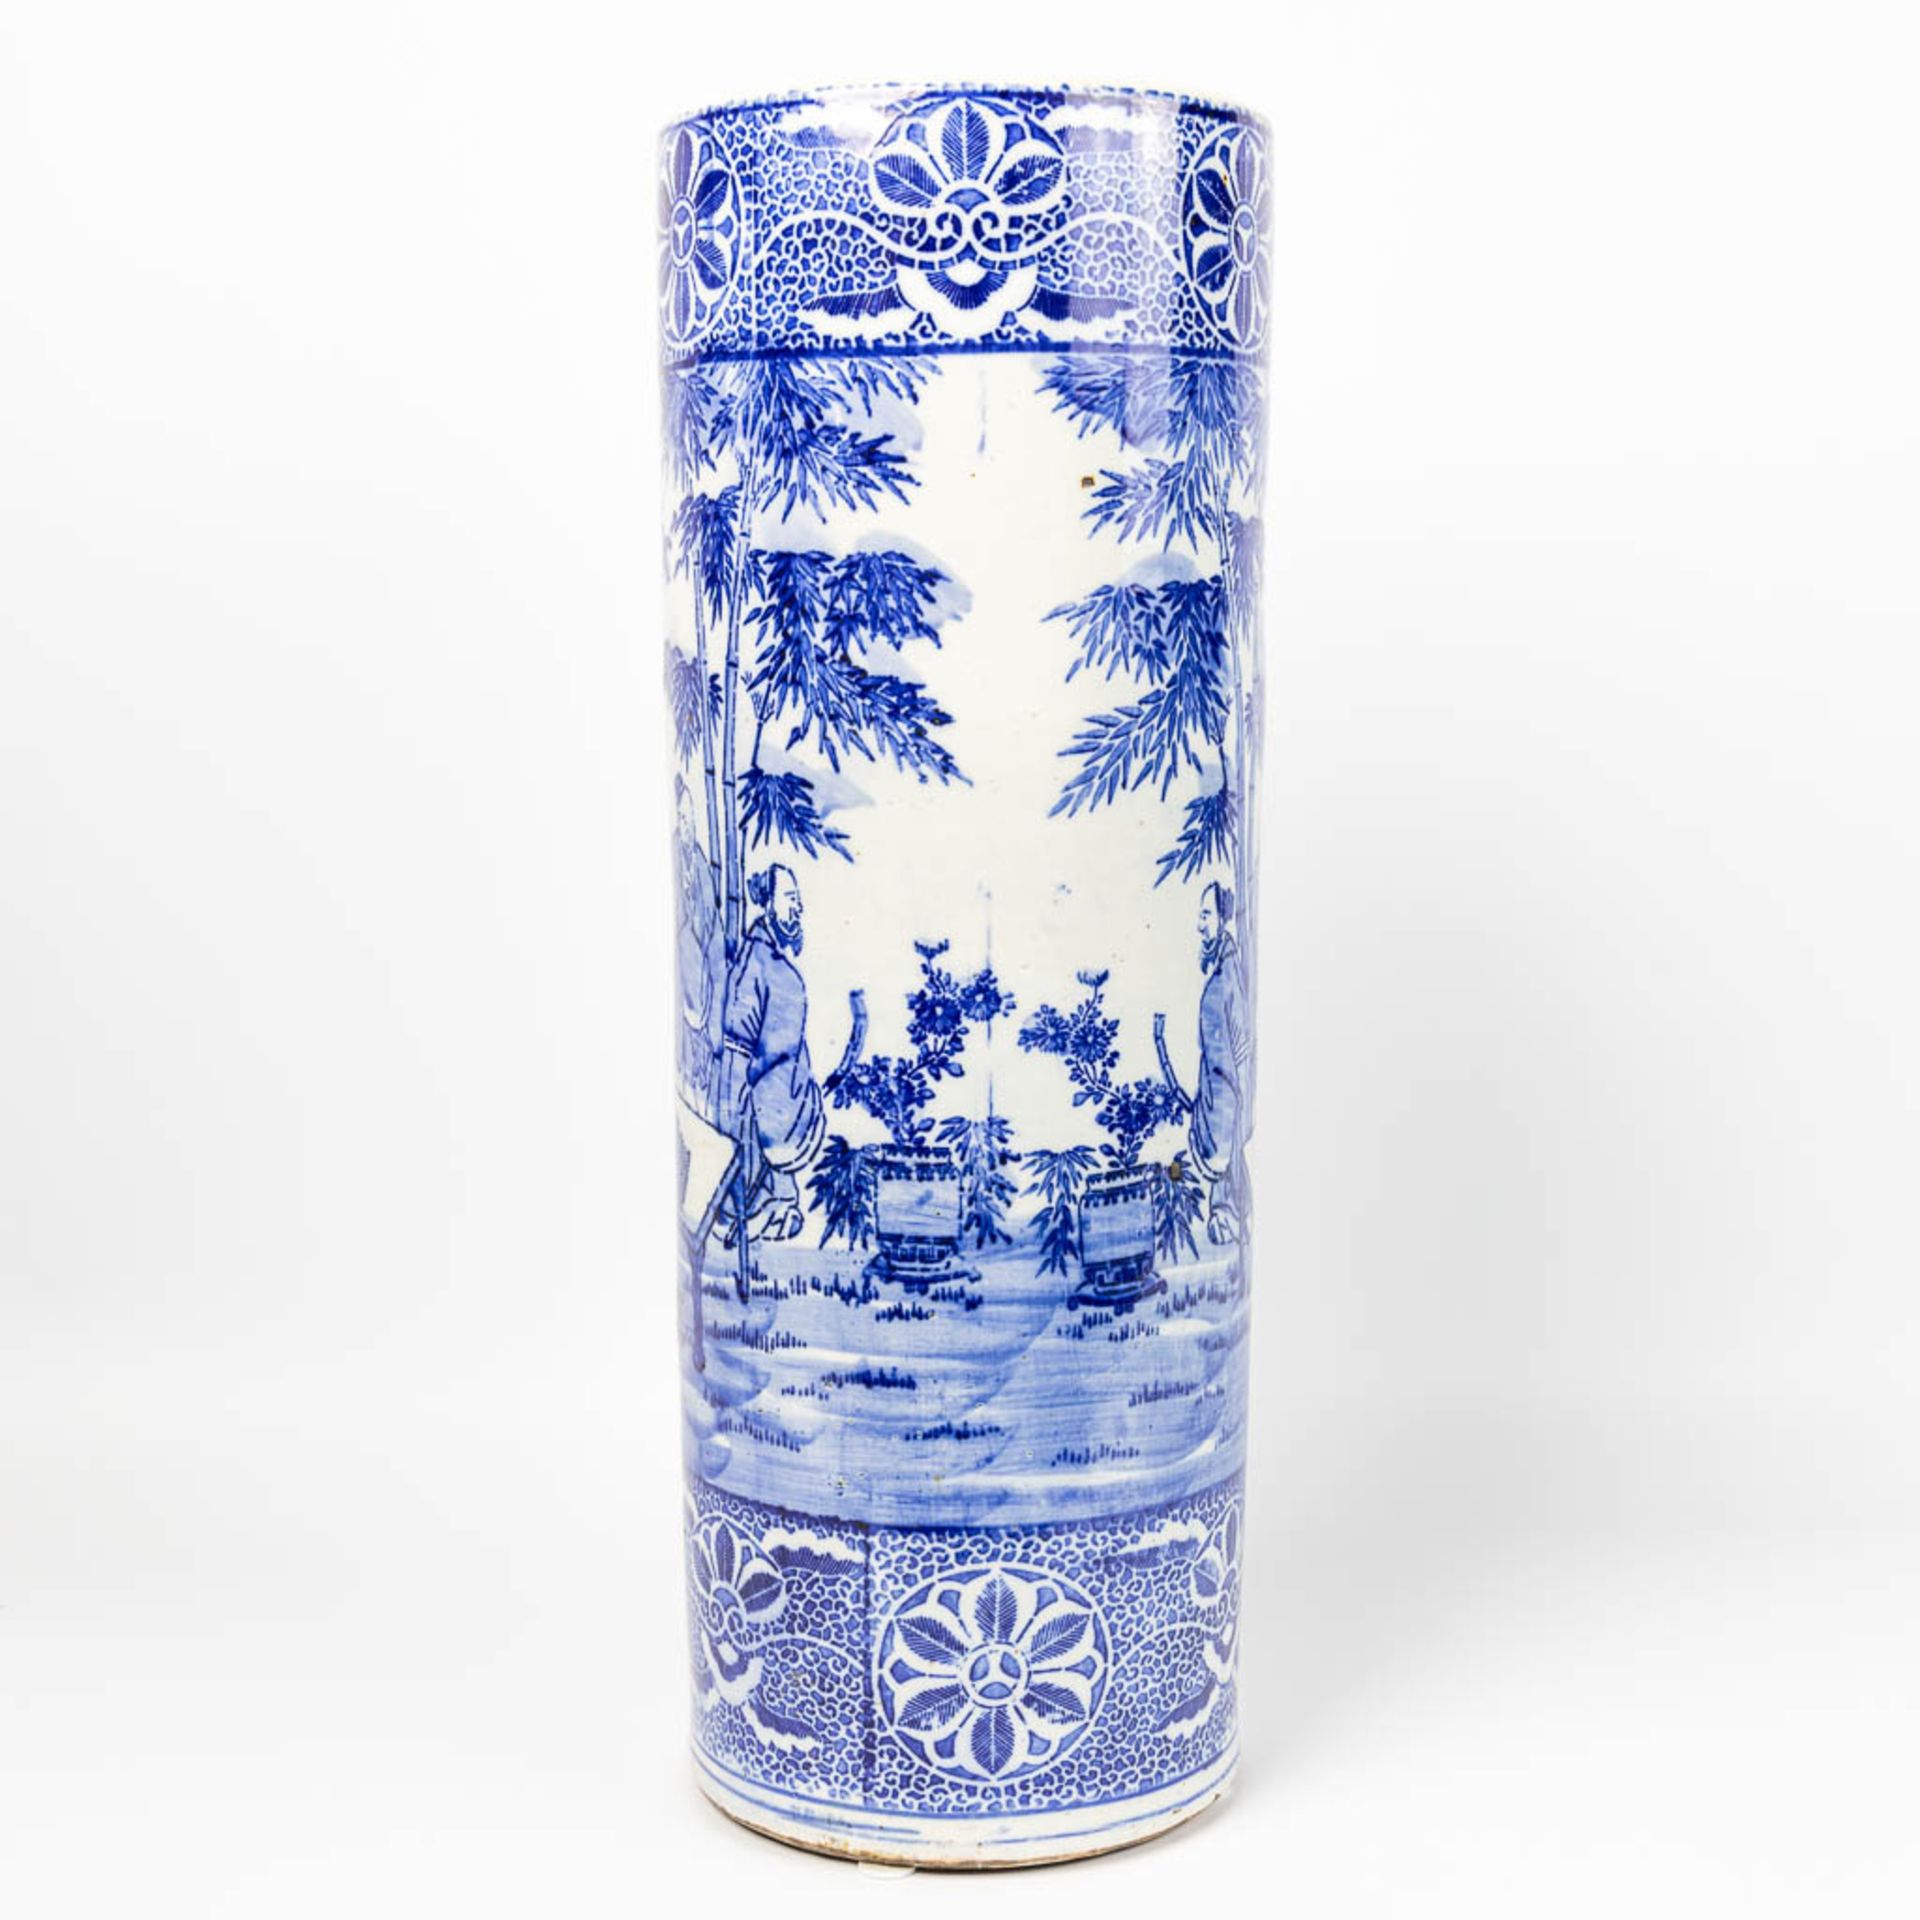 A vase made of Chinese Porcelain and decorated with a blue-white garden view. - Image 7 of 12